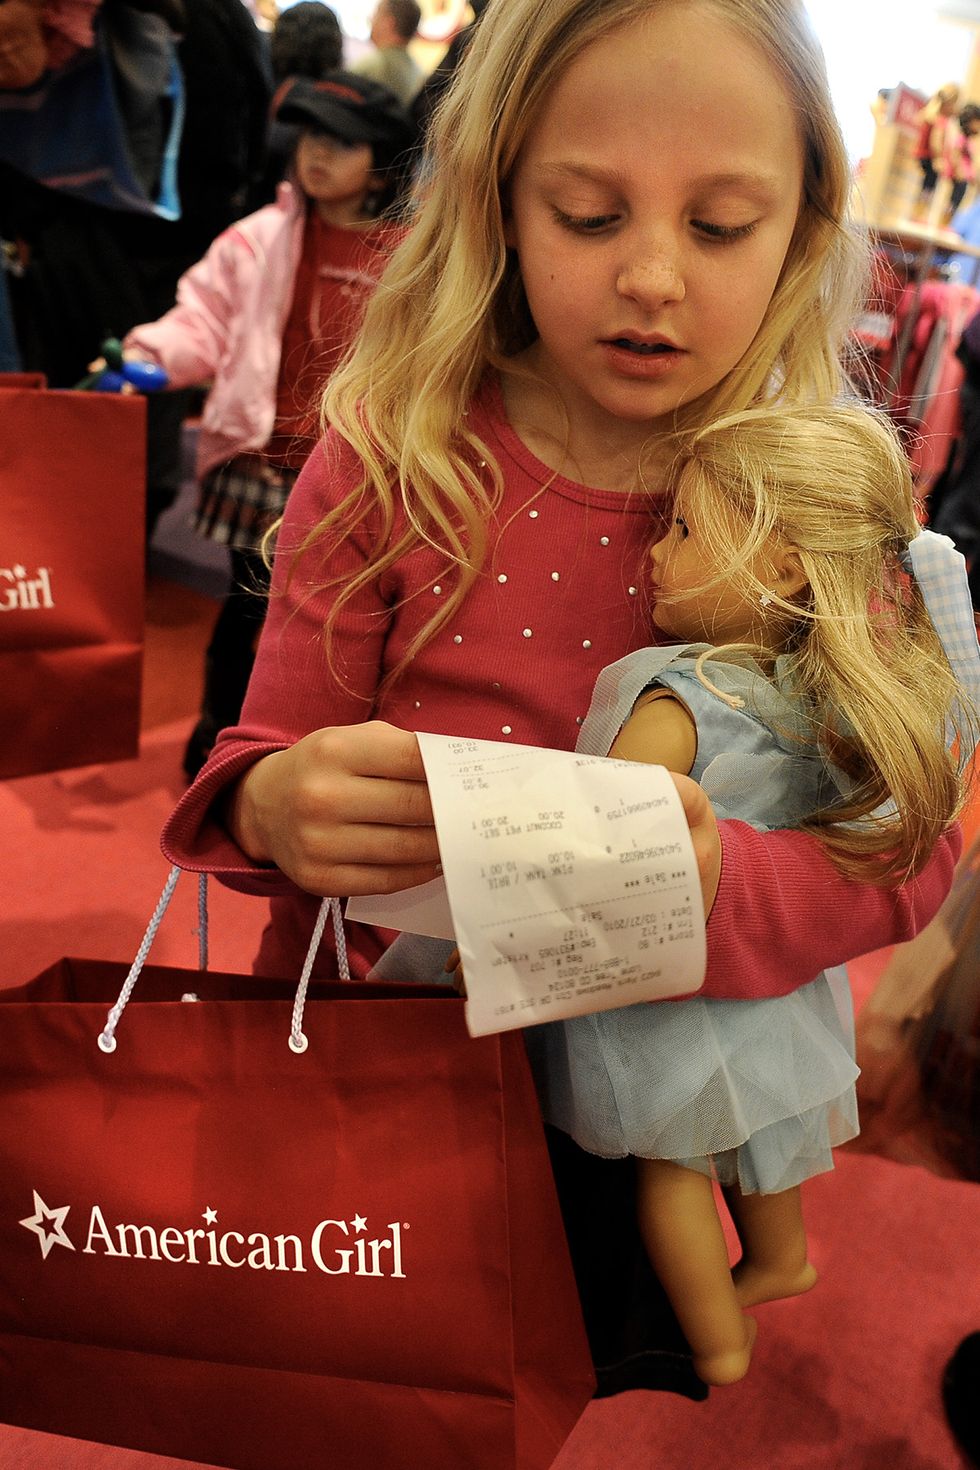 All American Girl Doll Names & Famous 5 Review - American Girl Ideas